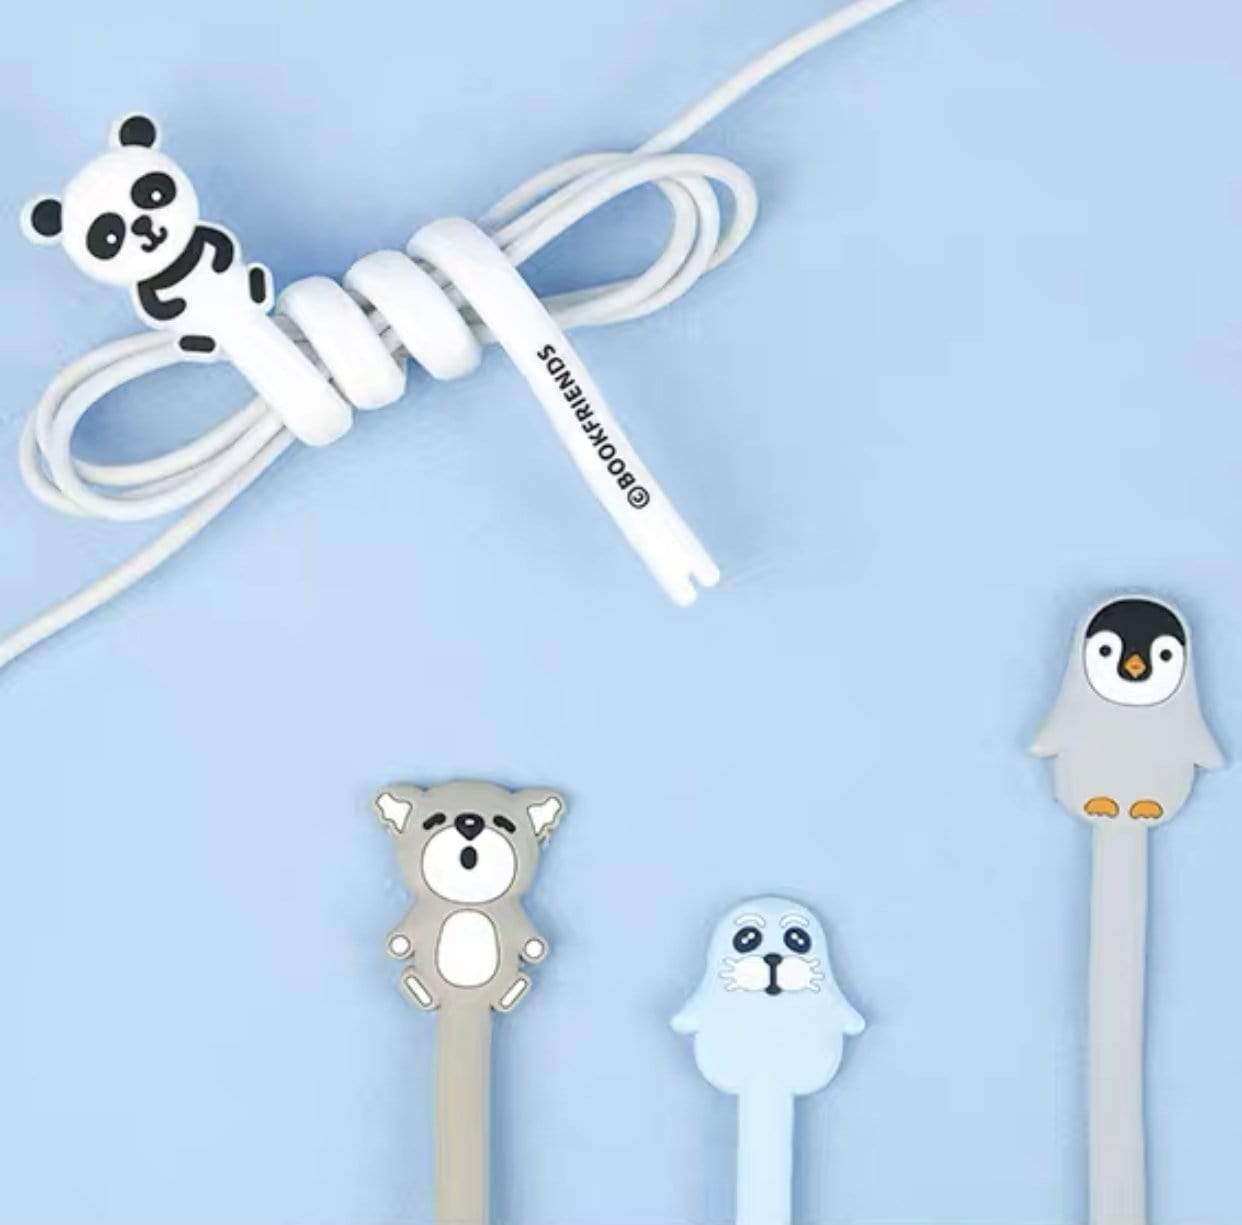 Helms Store Accessories Bookfriends Korea Animal Character Cable Organiser - Penguin